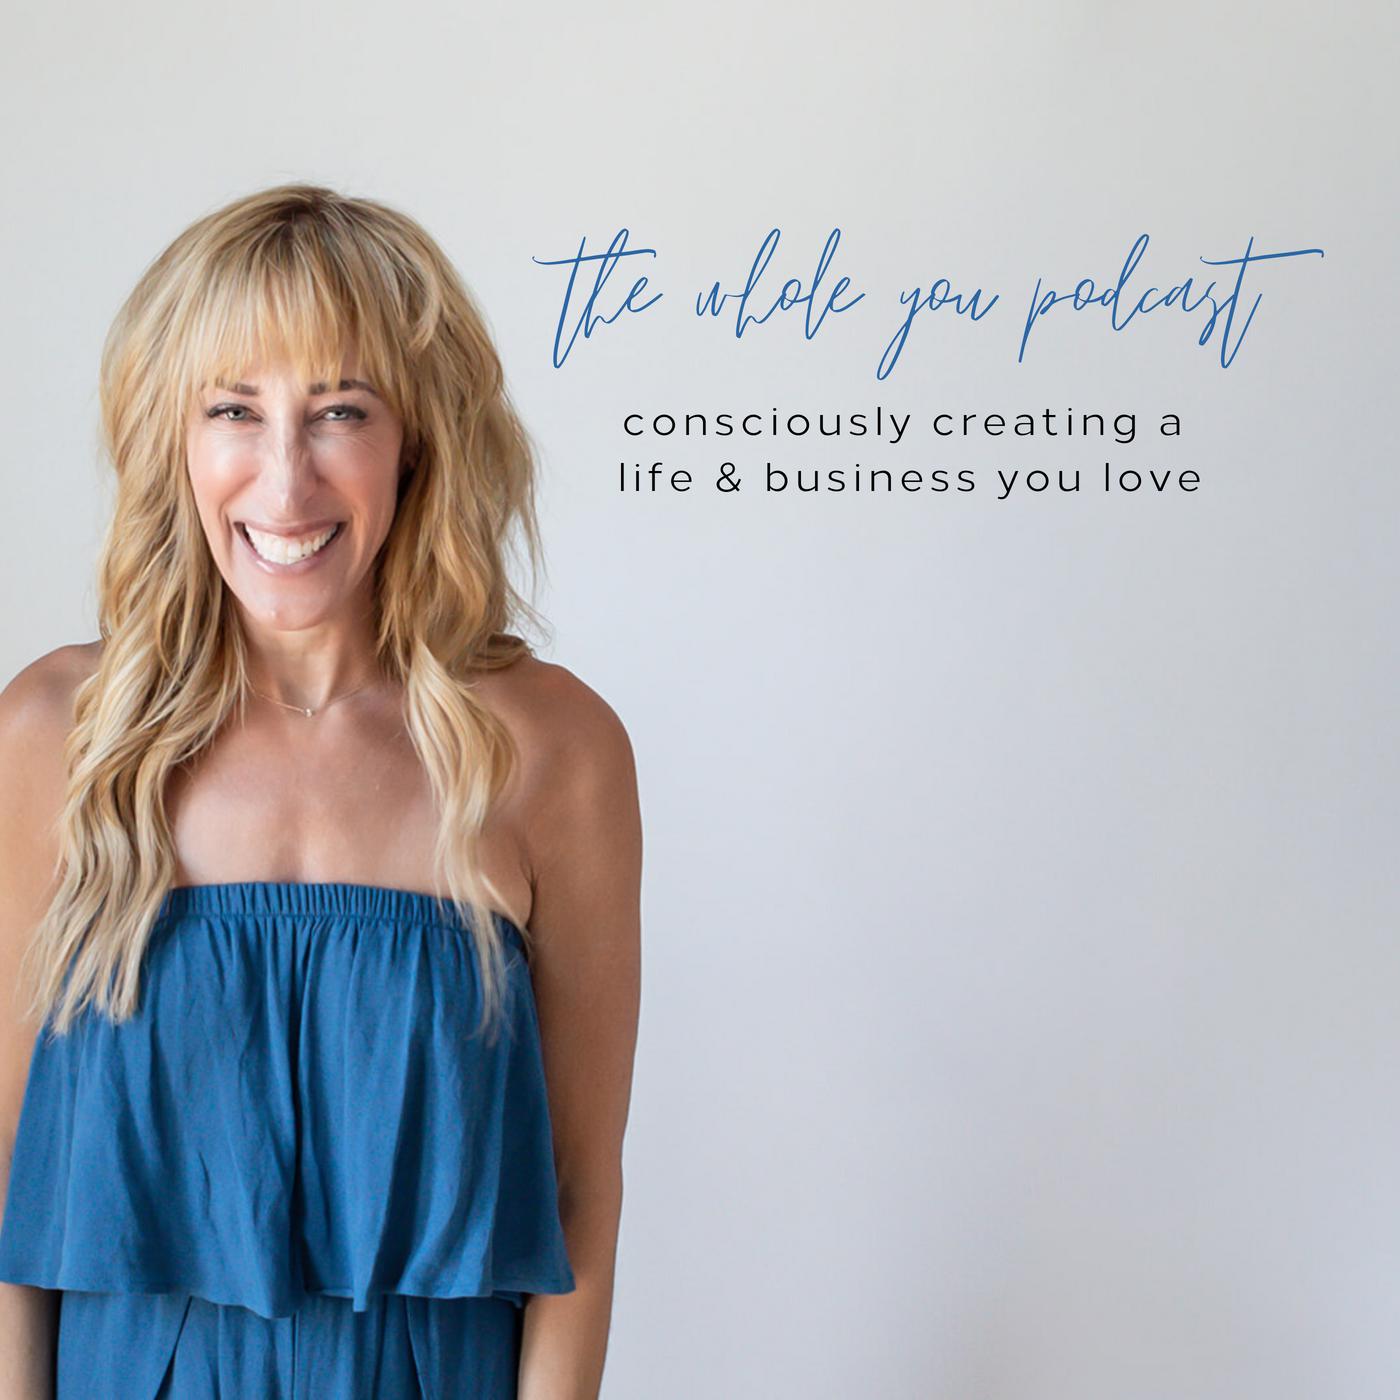 Whole you consciously creating a life and business you love